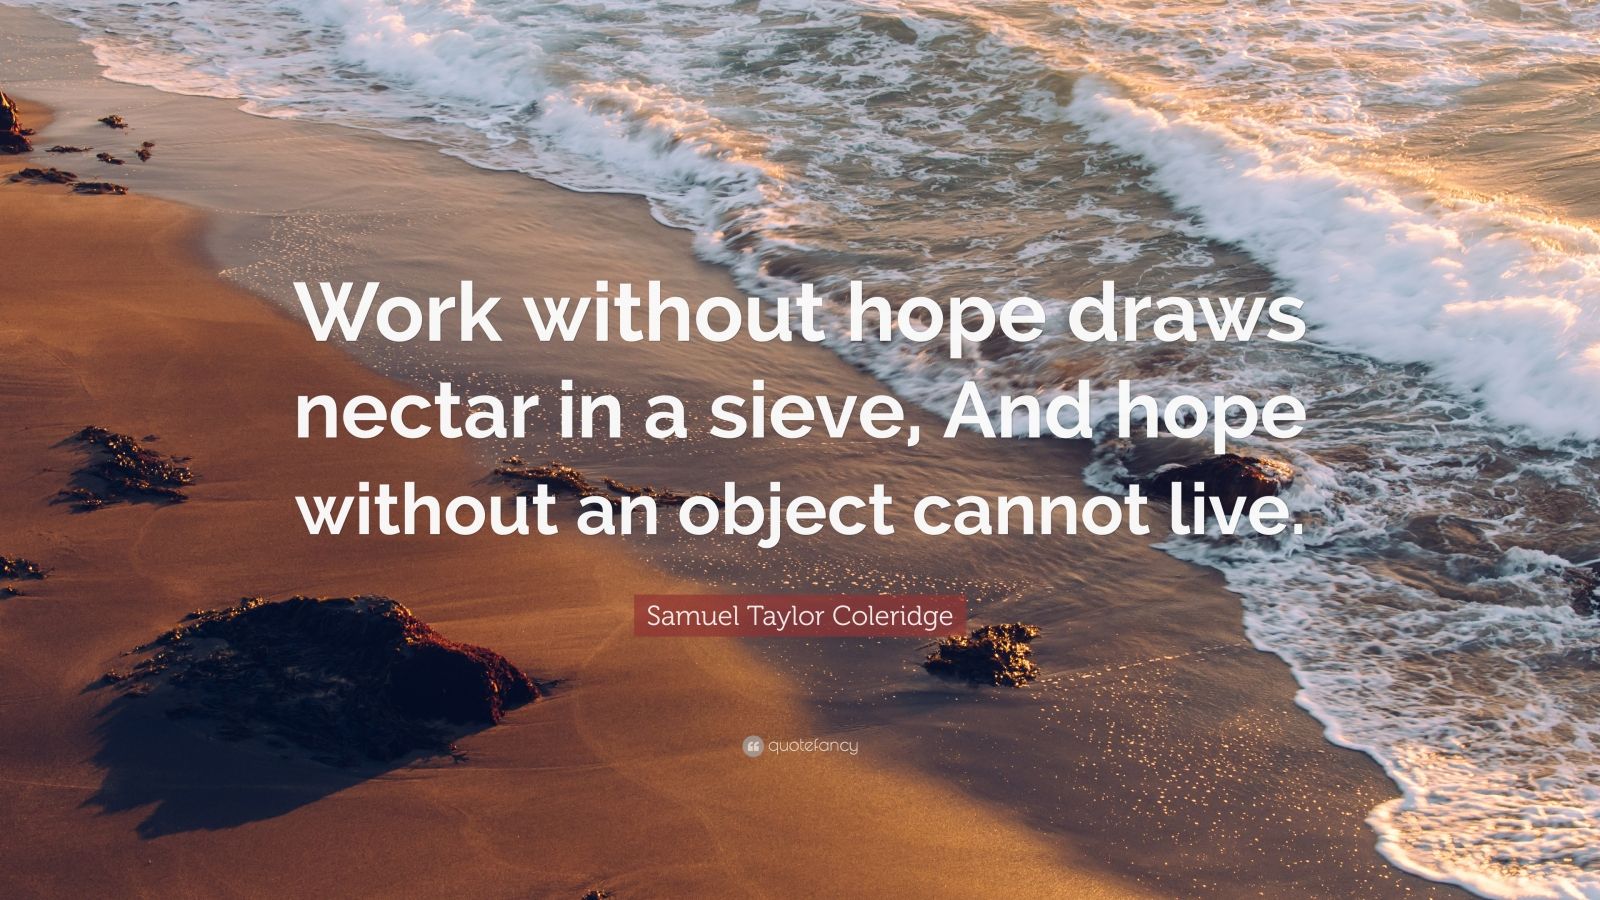 Samuel Taylor Coleridge Quote: “Work without hope draws nectar in a sieve, And hope ...